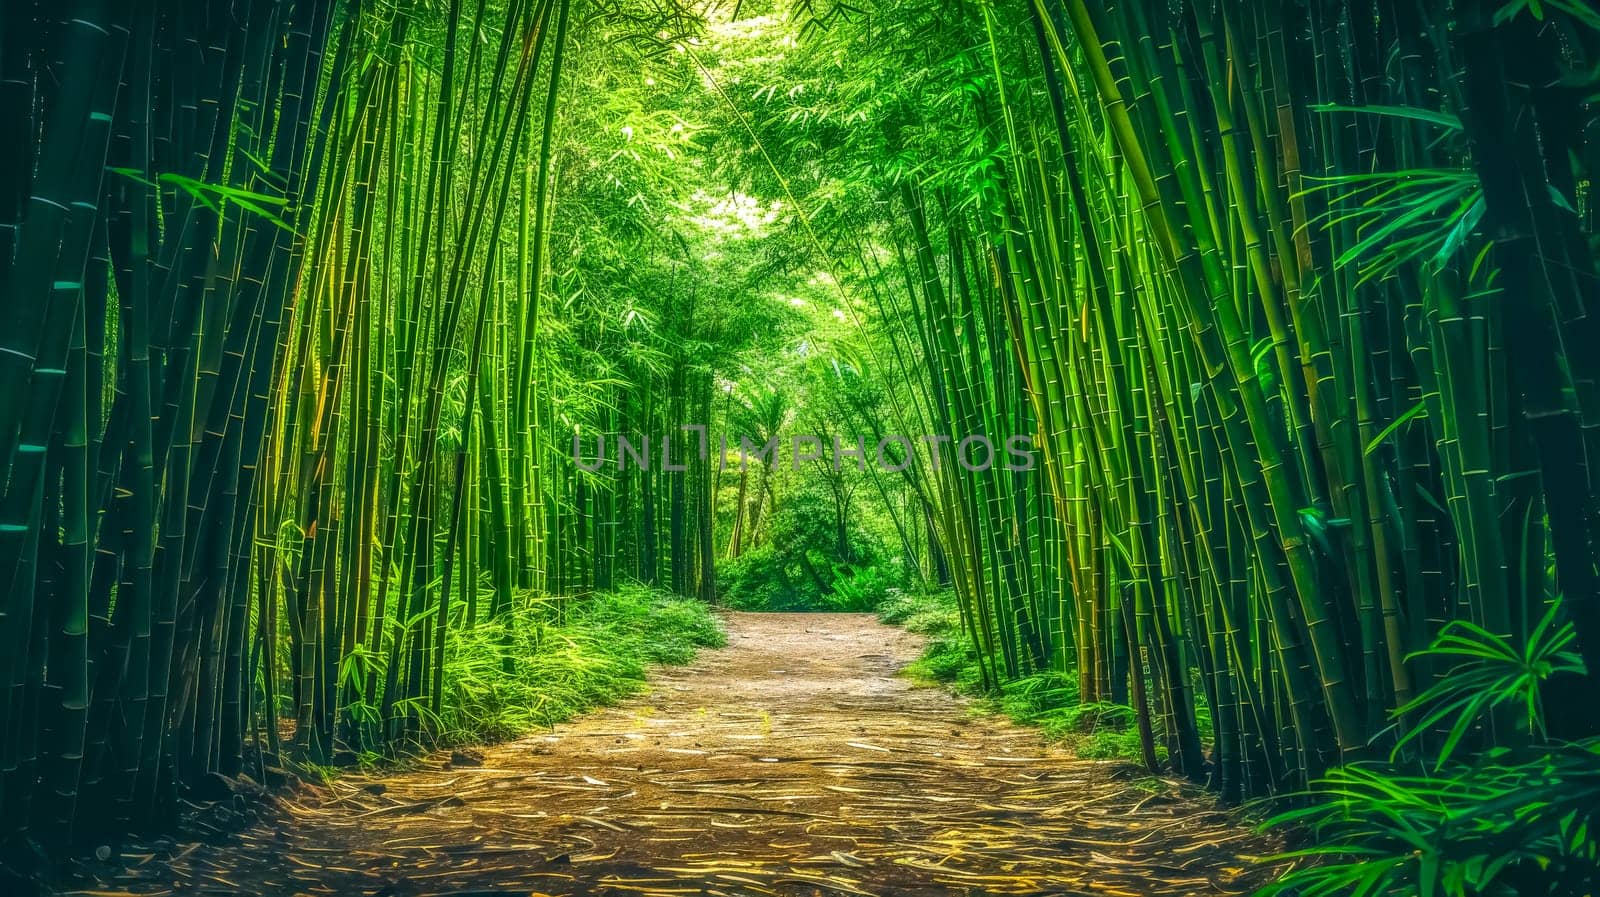 Tranquil and mystical enchanted bamboo forest pathway in a tropical jungle with lush foliage and vibrant greenery, perfect for eco-tourism, adventure walking, zen meditation, and outdoor exploration